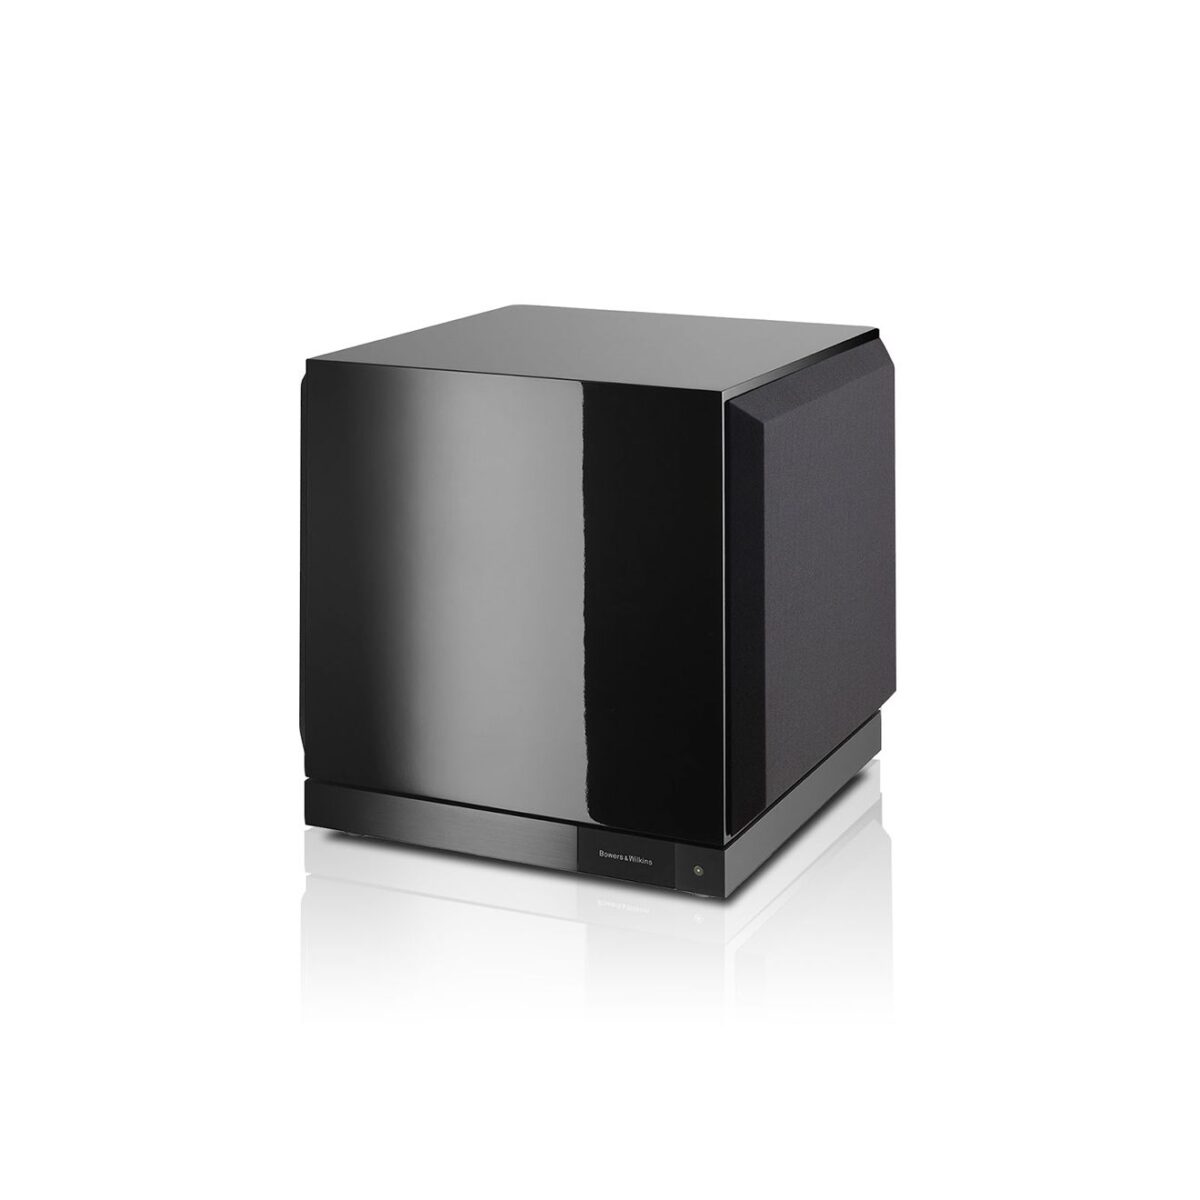 Bowers & Wilkins Subwoofer DB1